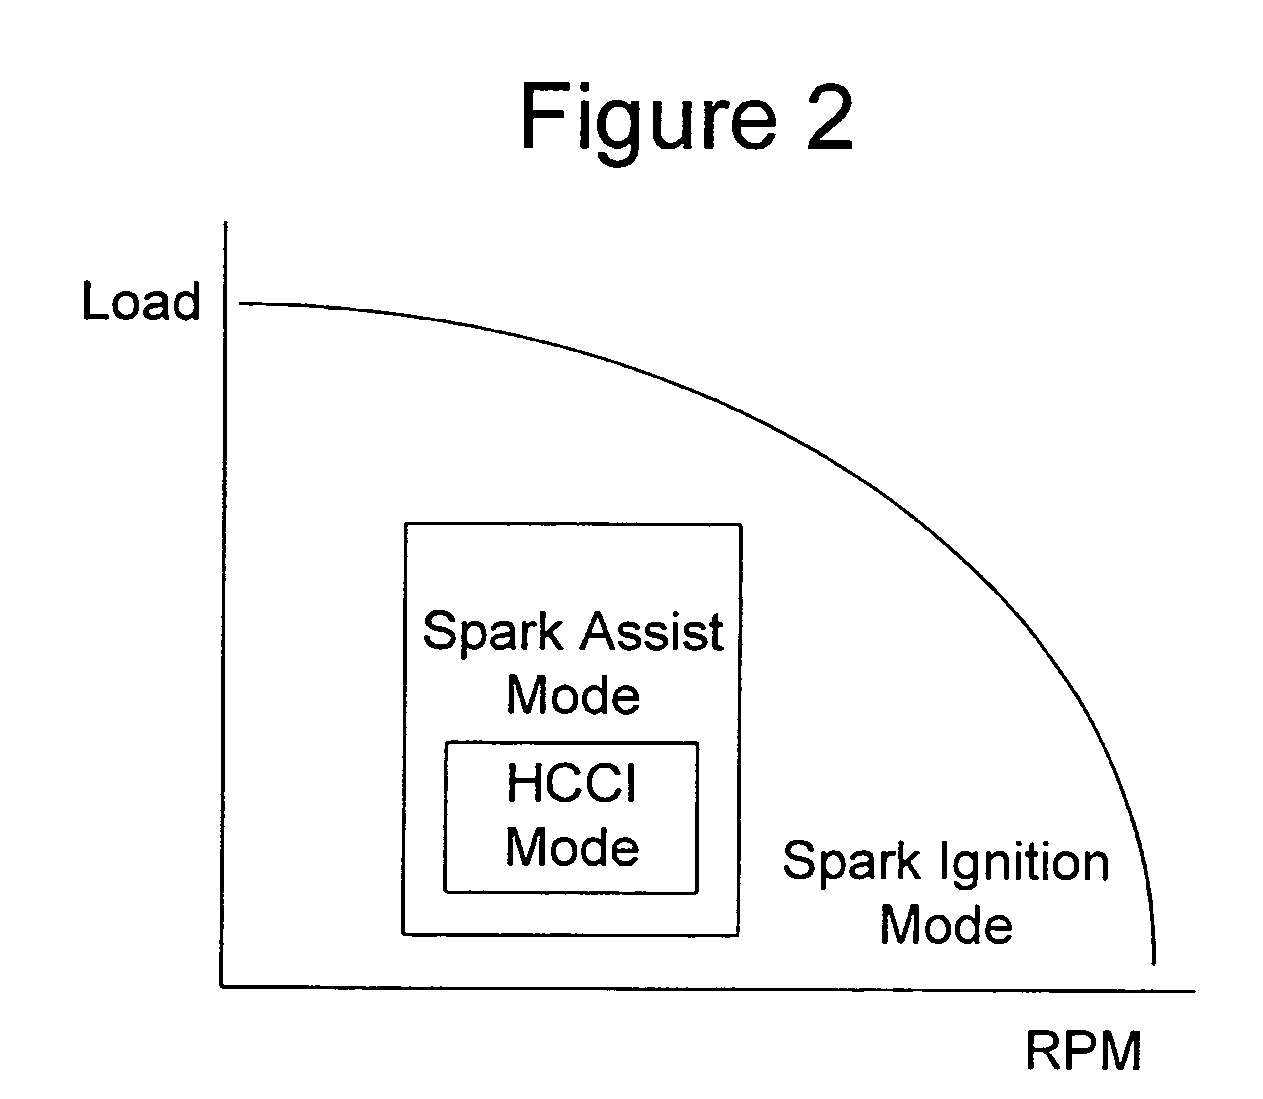 Transition strategy for engine operation with spark ignition and homogeneous charge compression ignition modes